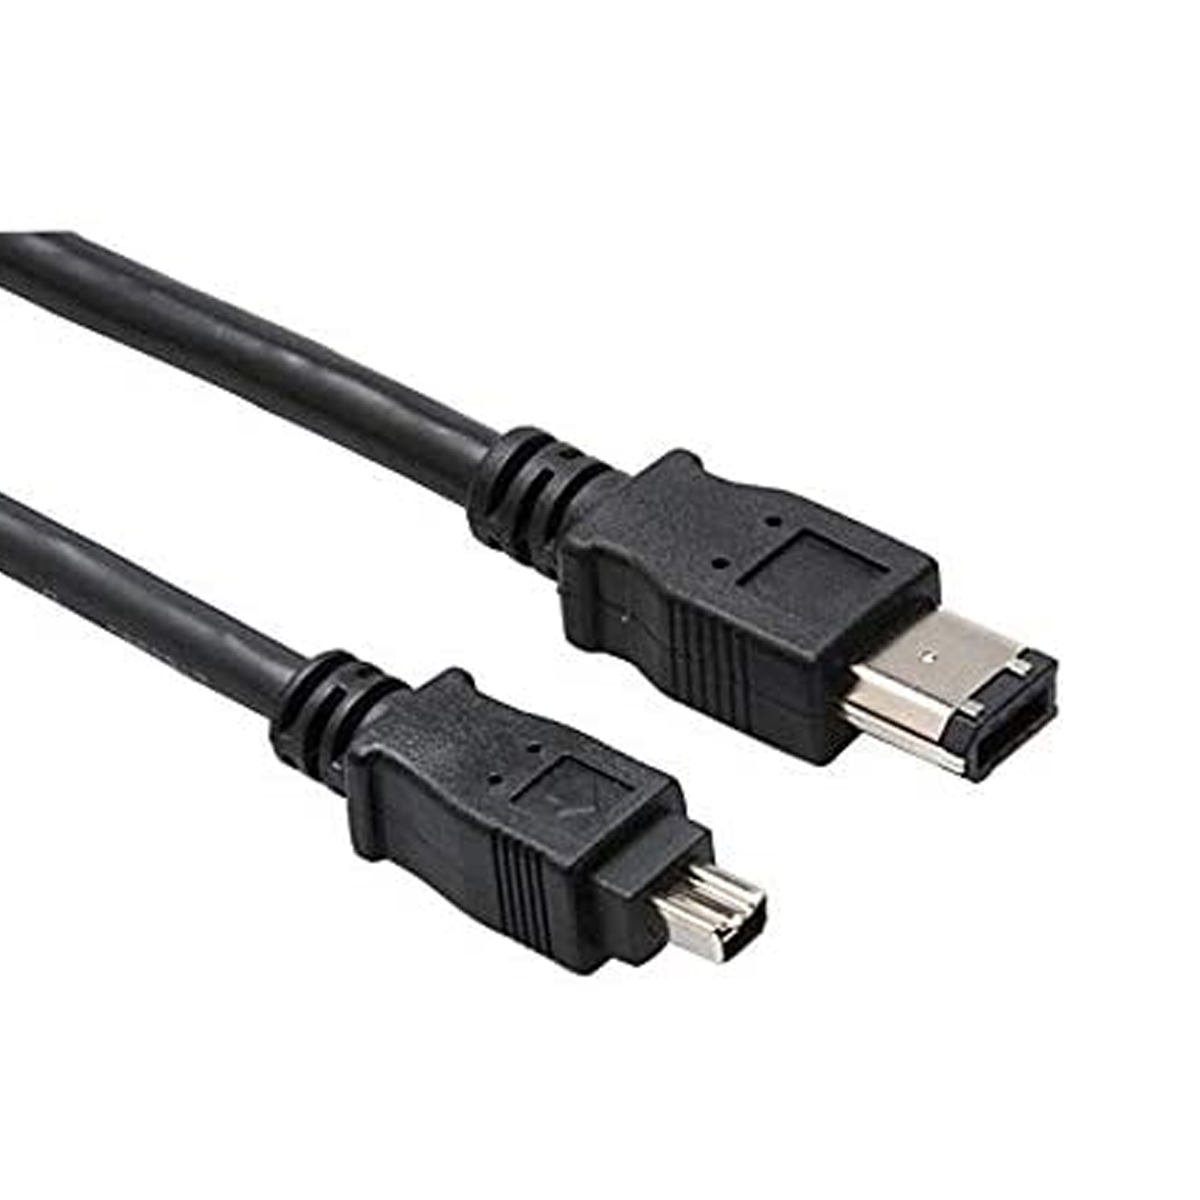 Hosa Technology FIW-46-106 Firewire 400 4-Pin to 6-Pin Cable, 6ft